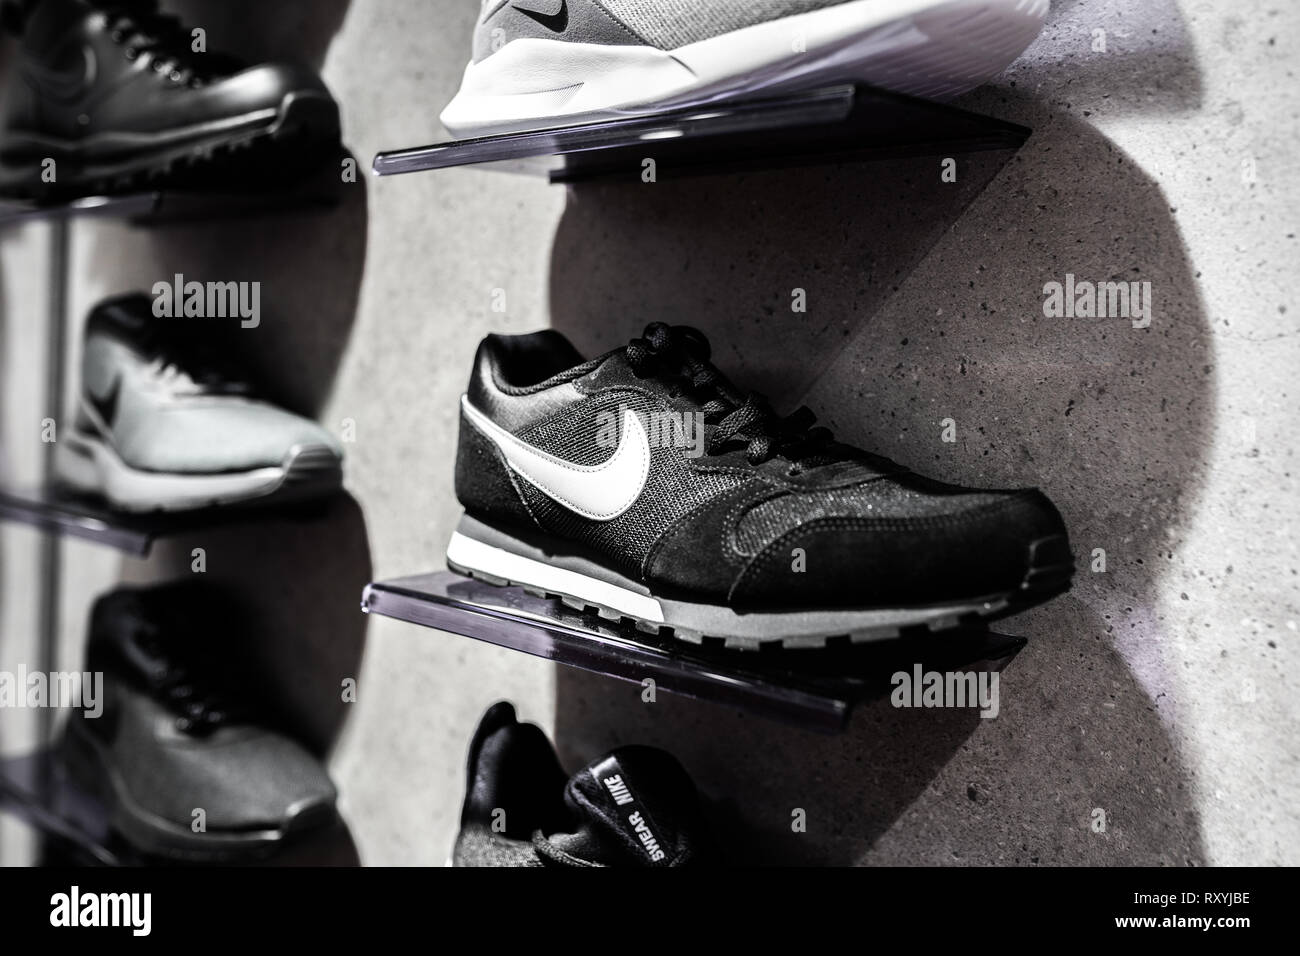 Nurmberg, GERMANY - February 27, 2019: The NIKE black man sneakers on the shell in the shop. Fashionable foot wear shoes. Close up photo sport concept Stock Photo